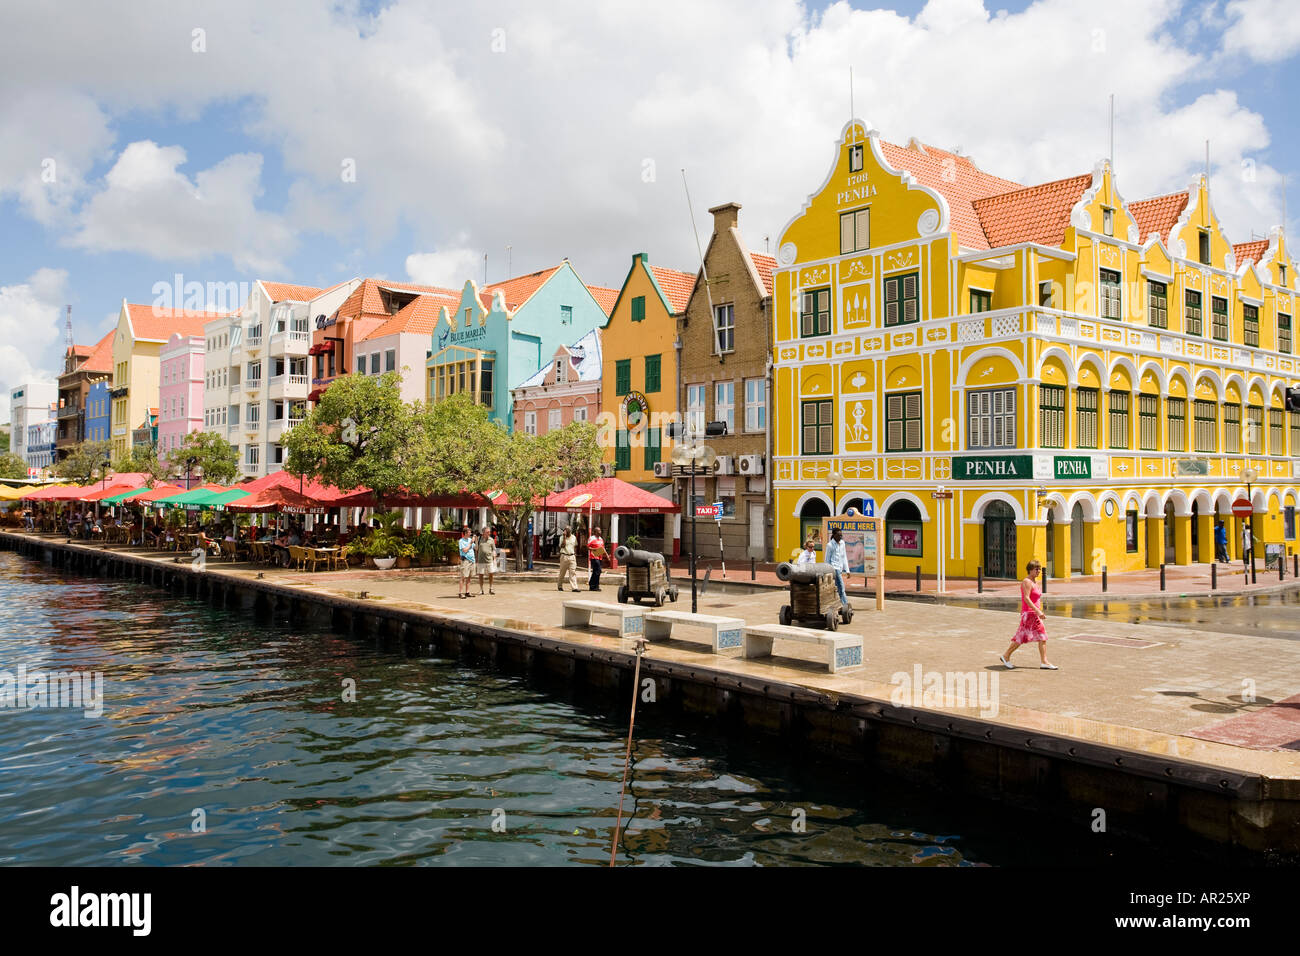 Punda Harbour Front Willemstad Curacao Foto Stock